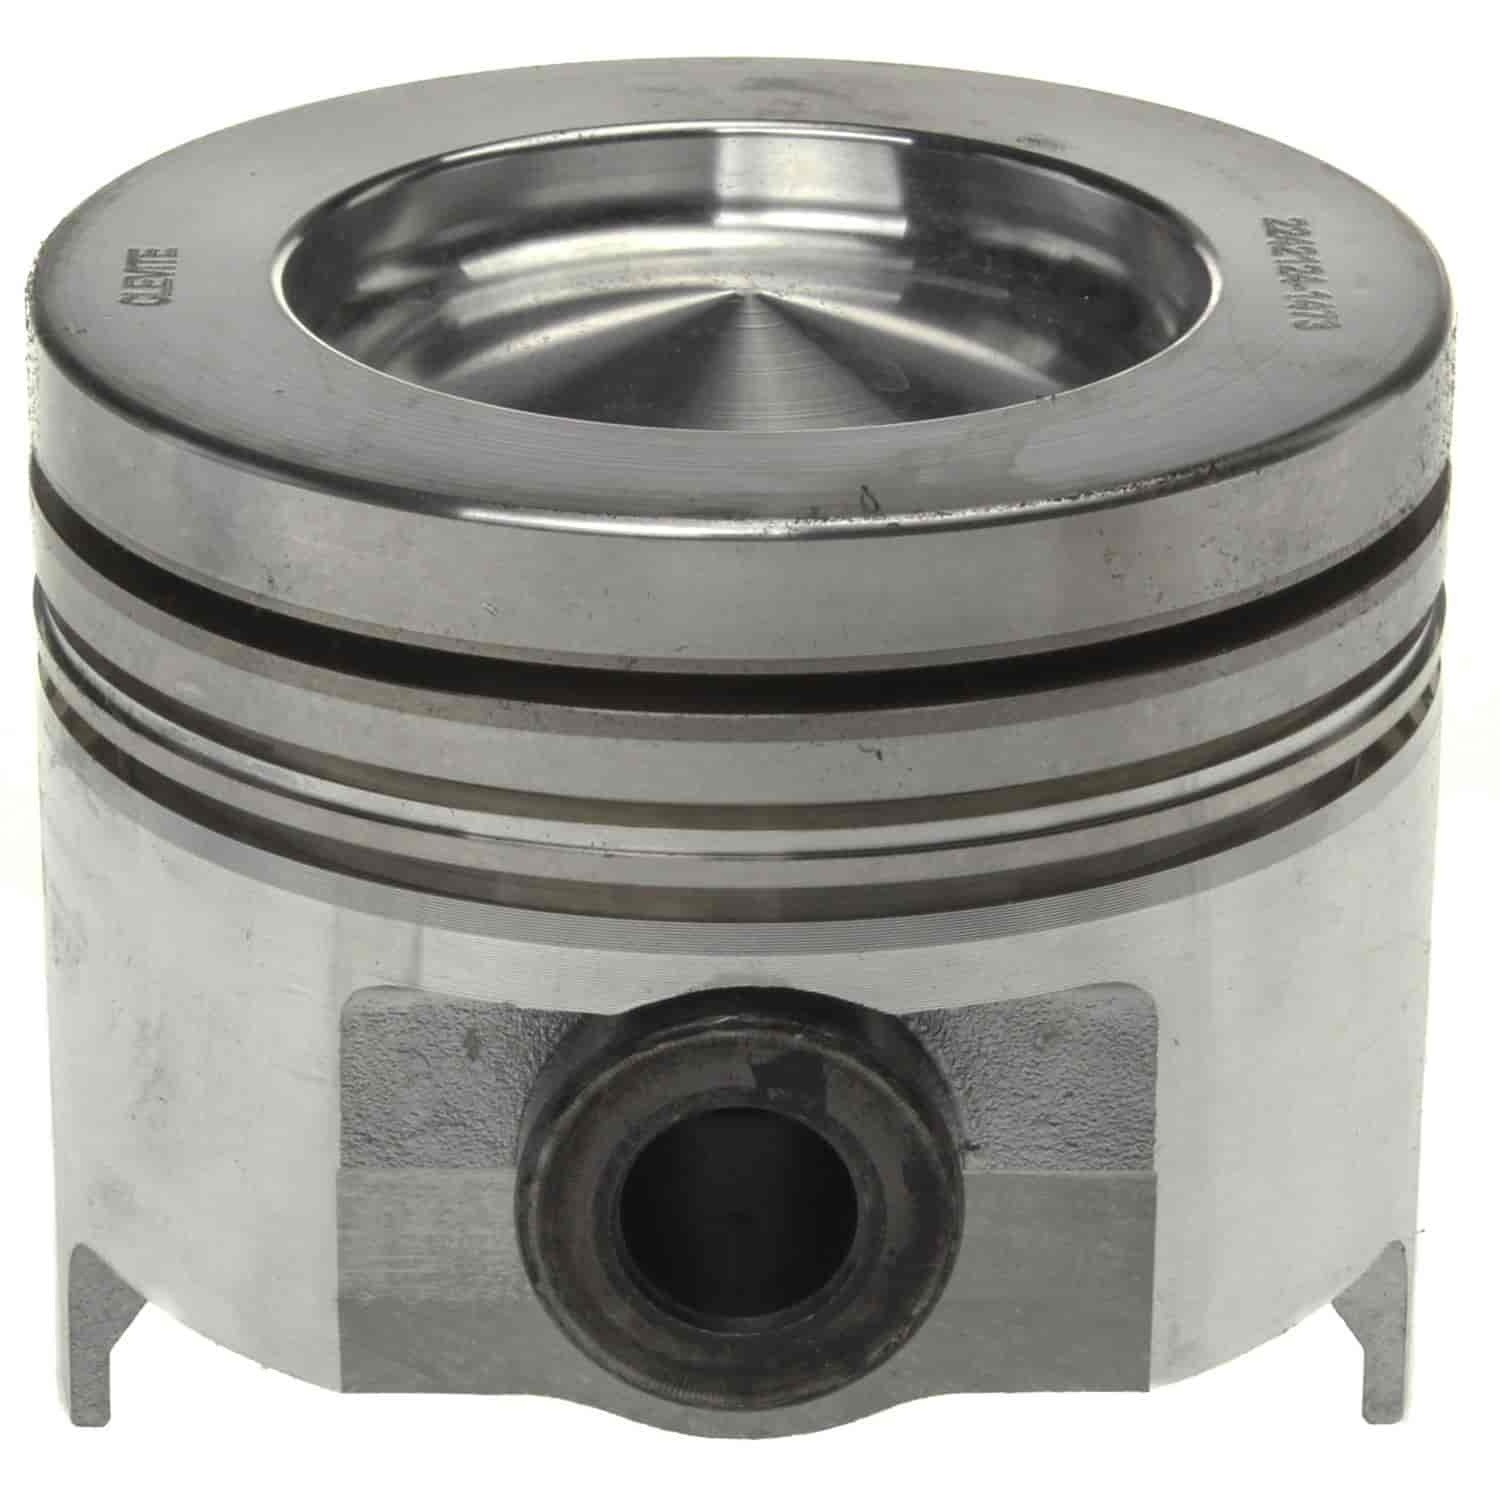 Piston for Cummins 4.625 Bore 155 210 378 504 Engs.